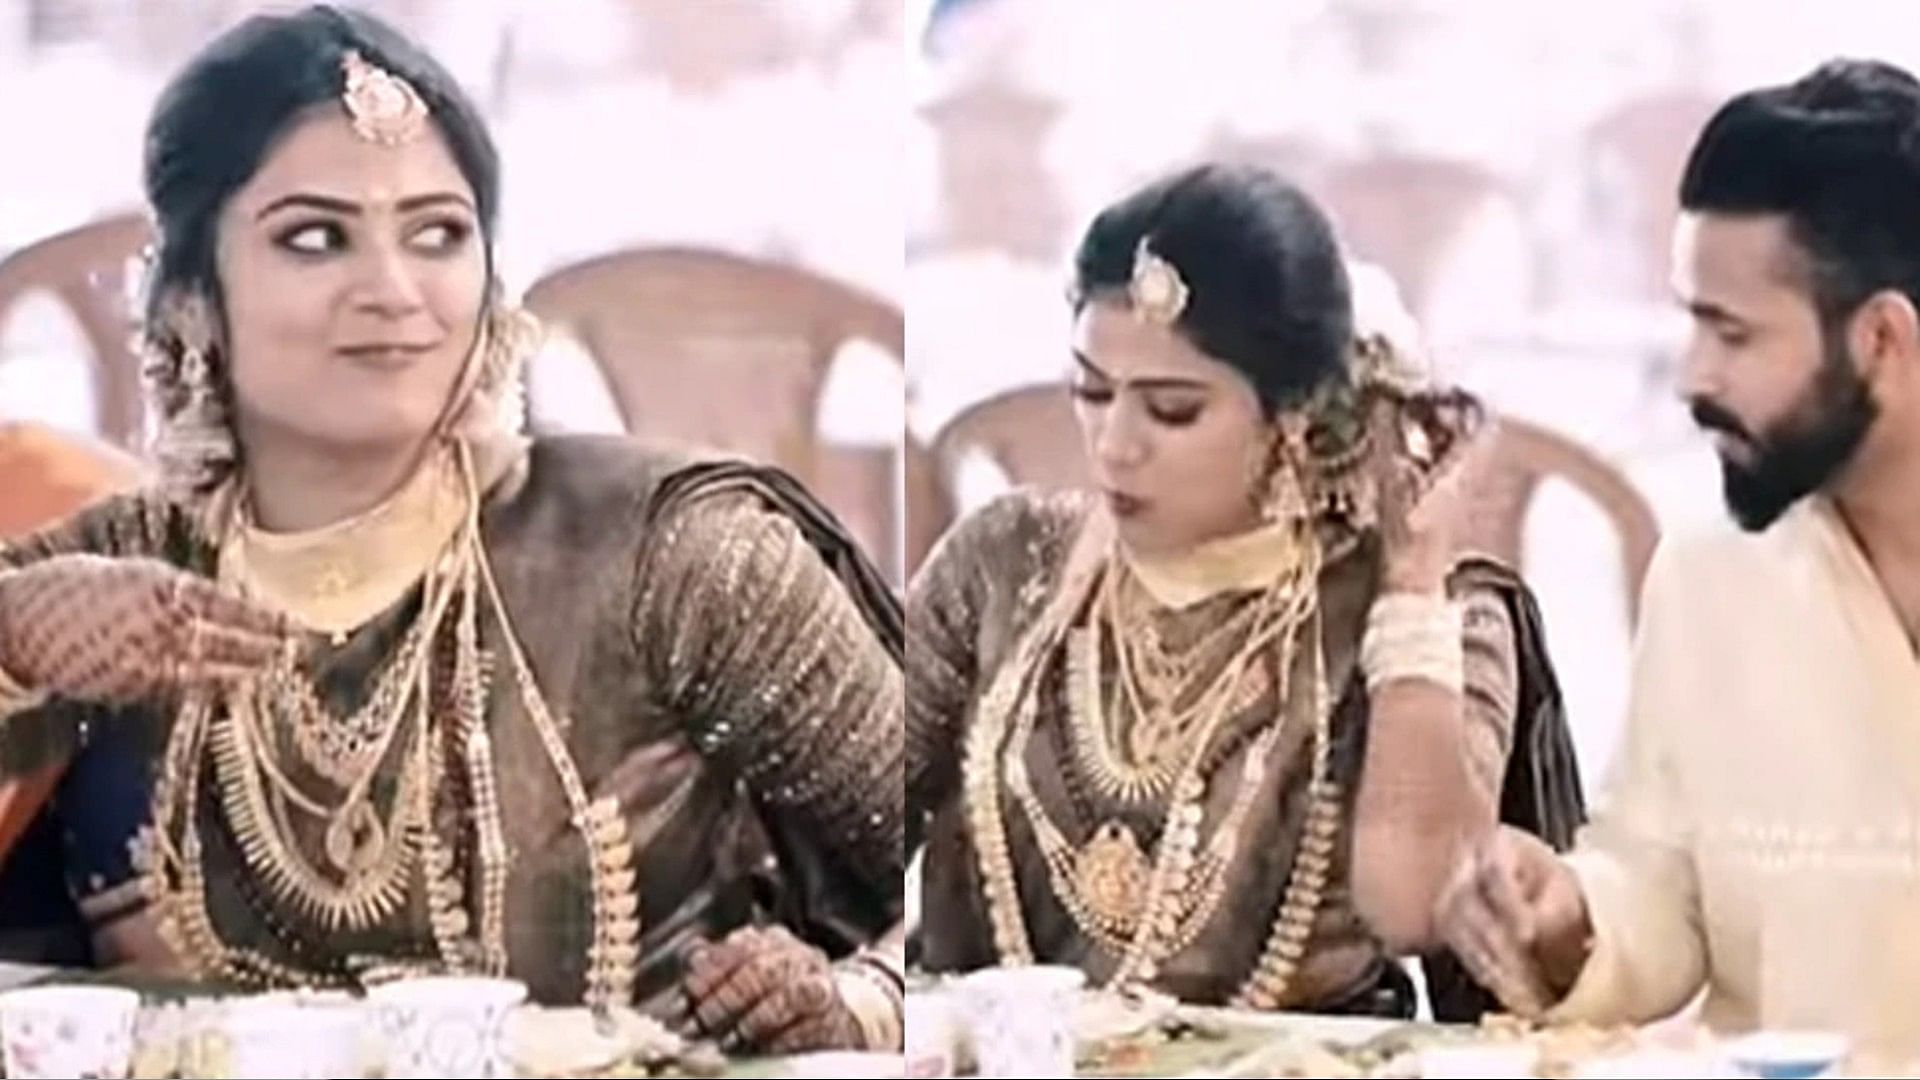 Naughty bride did such a naughty act with the groom during the meal that people lost their heart